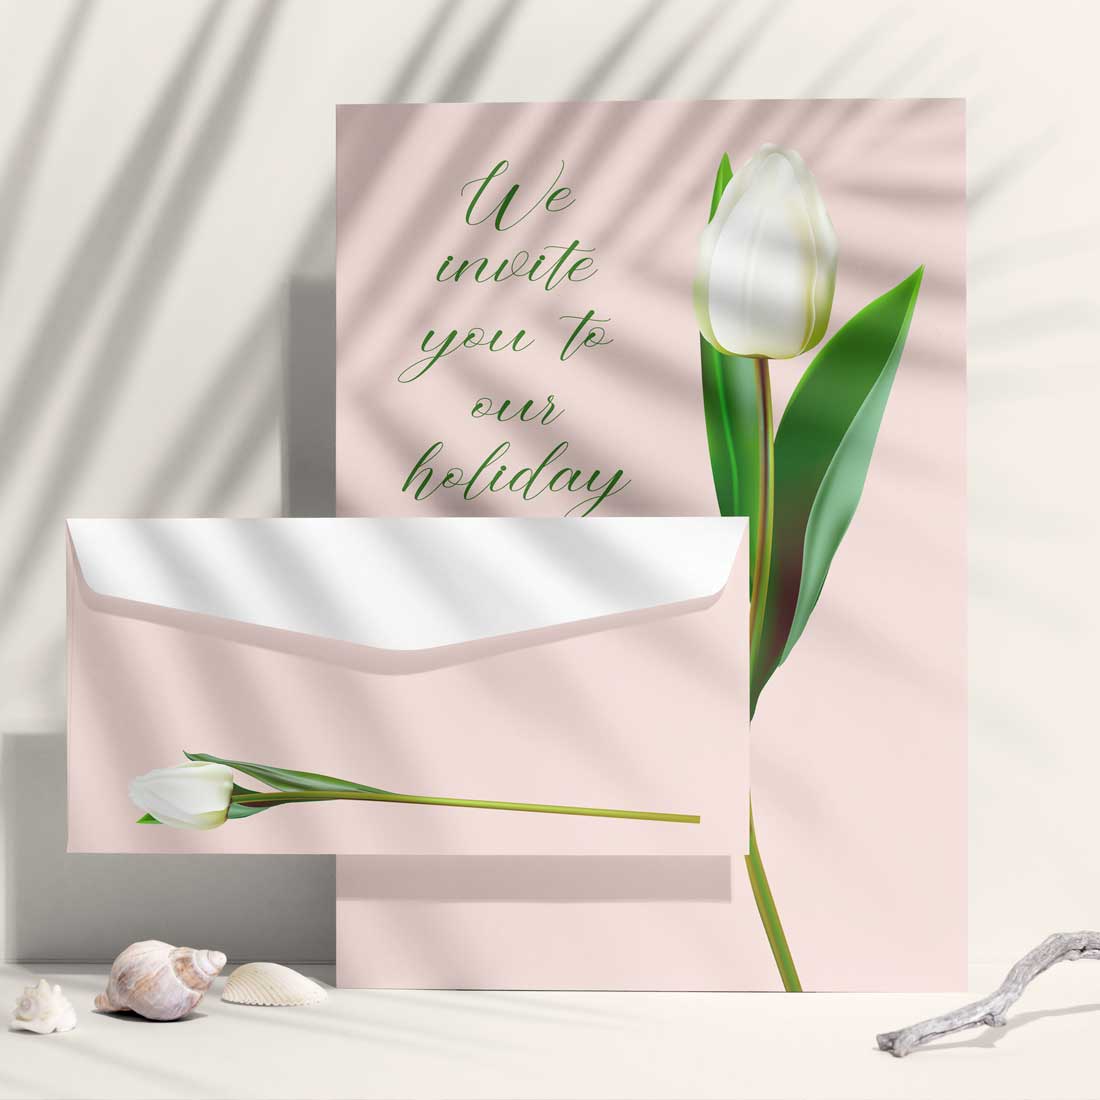 Greeting card with a white tulip on a pink background.